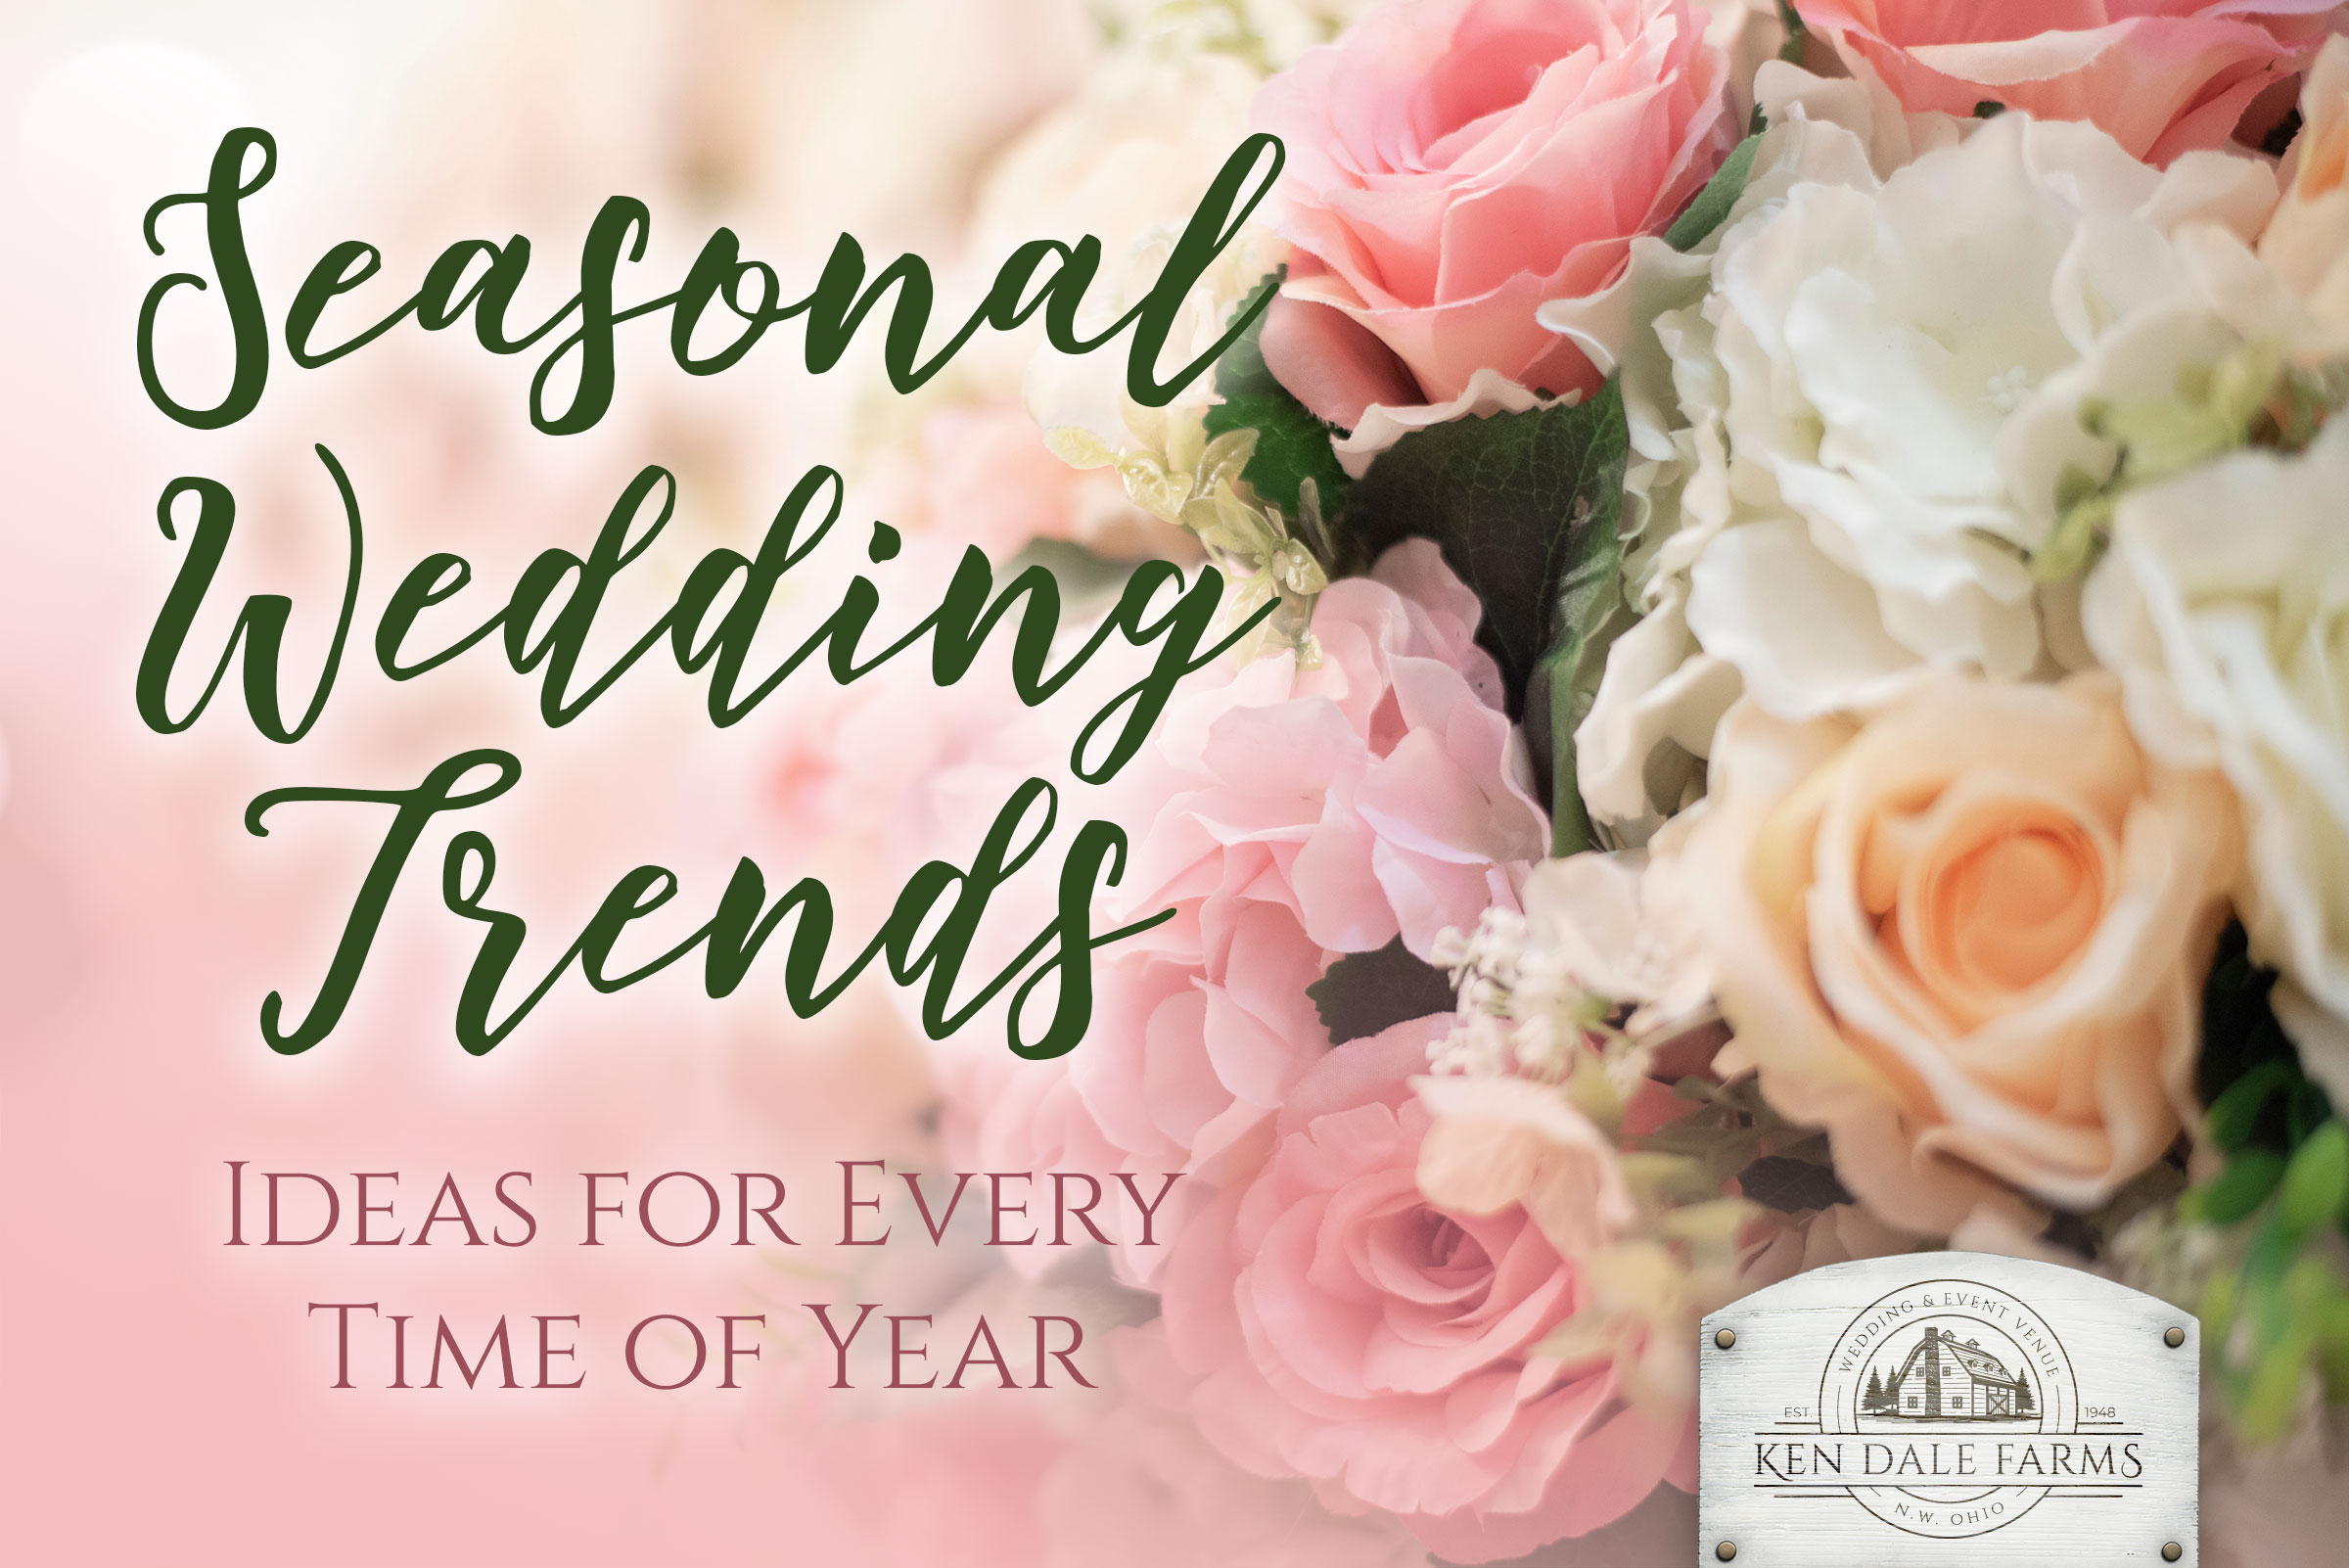 Seasonal Wedding Trends: Ideas for Every Time of Year